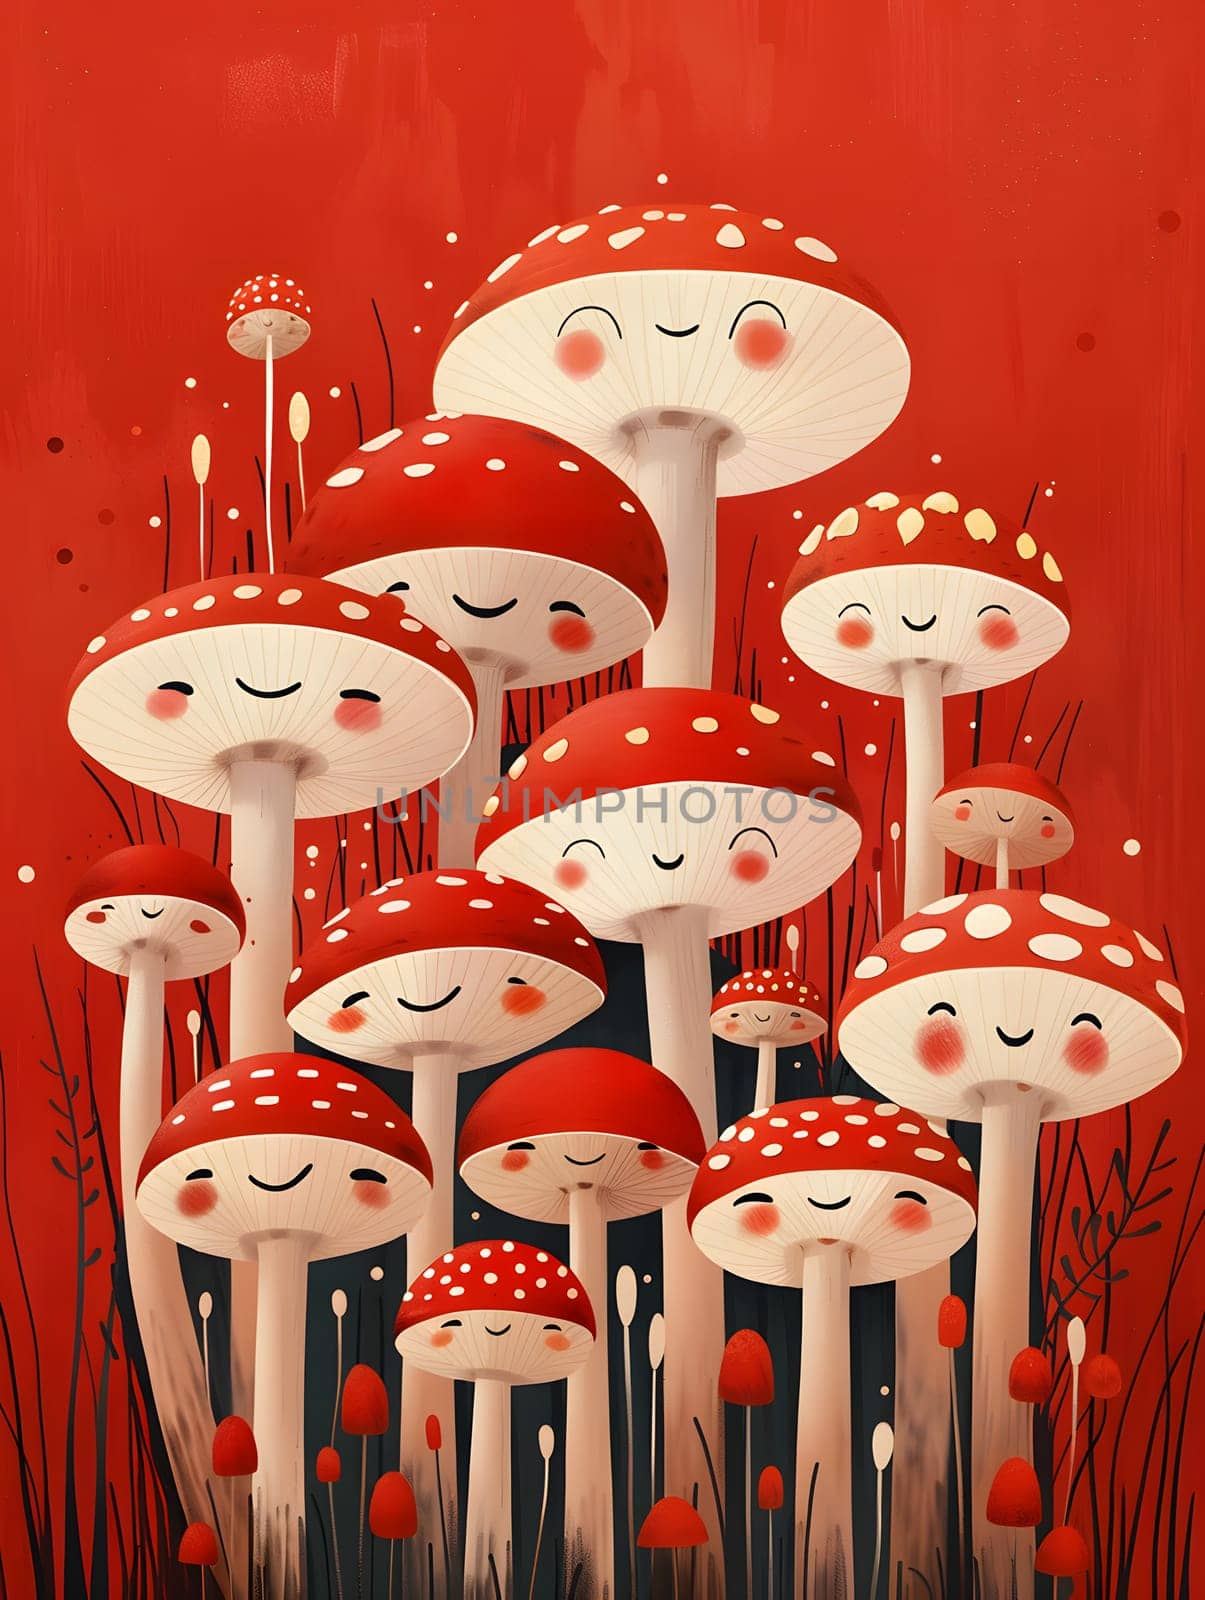 A cluster of mushrooms with cheerful faces sprouting in the grass. The vibrant red caps glow in the light, creating a whimsical art event in the garden